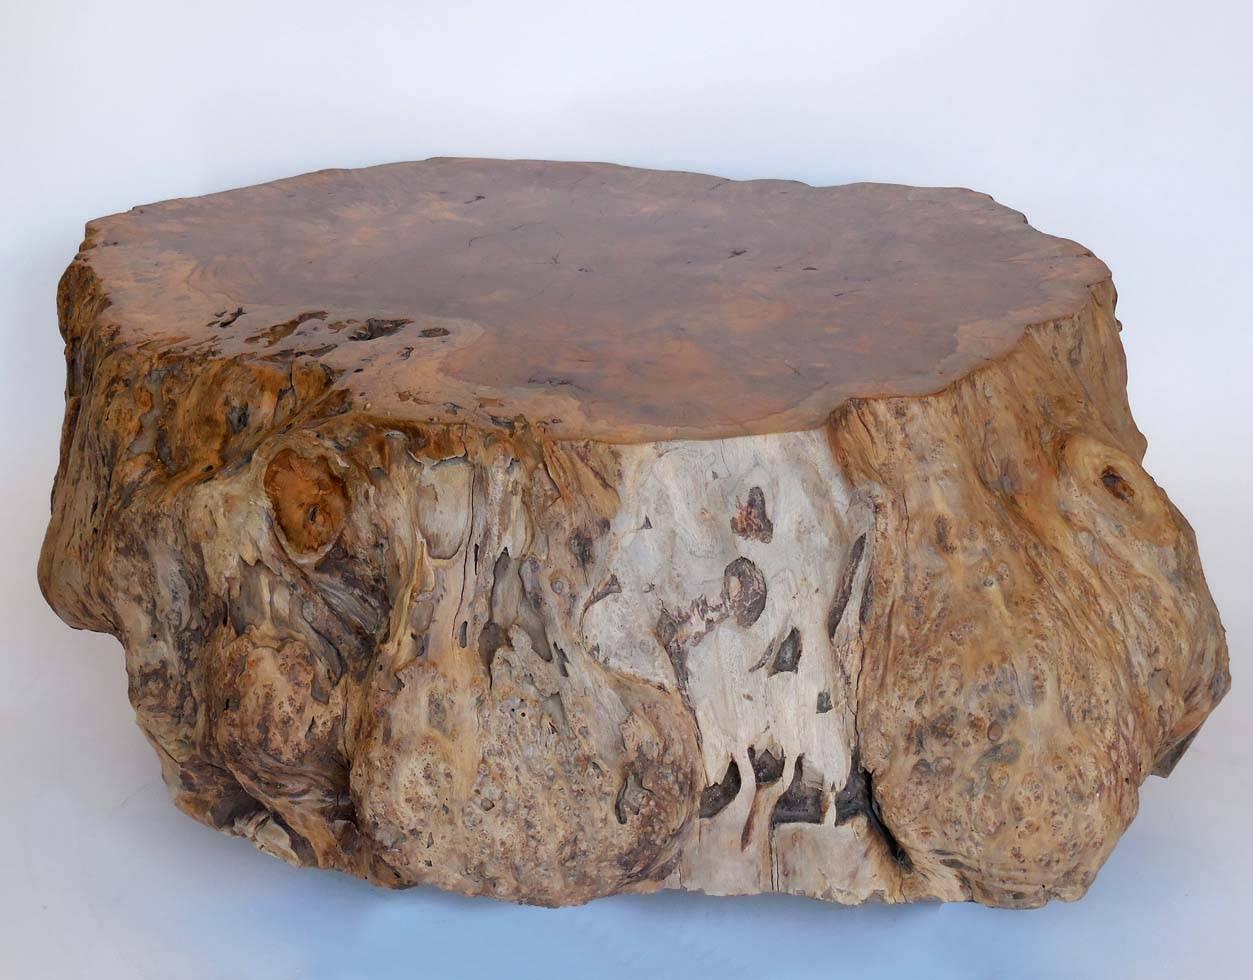 Large teak root coffee table with polished top surface. Spectacular piece of teak. Organic shape, sits flat and balanced. Top is smooth and straight. Knots and burls throughout. Lovely teak color.